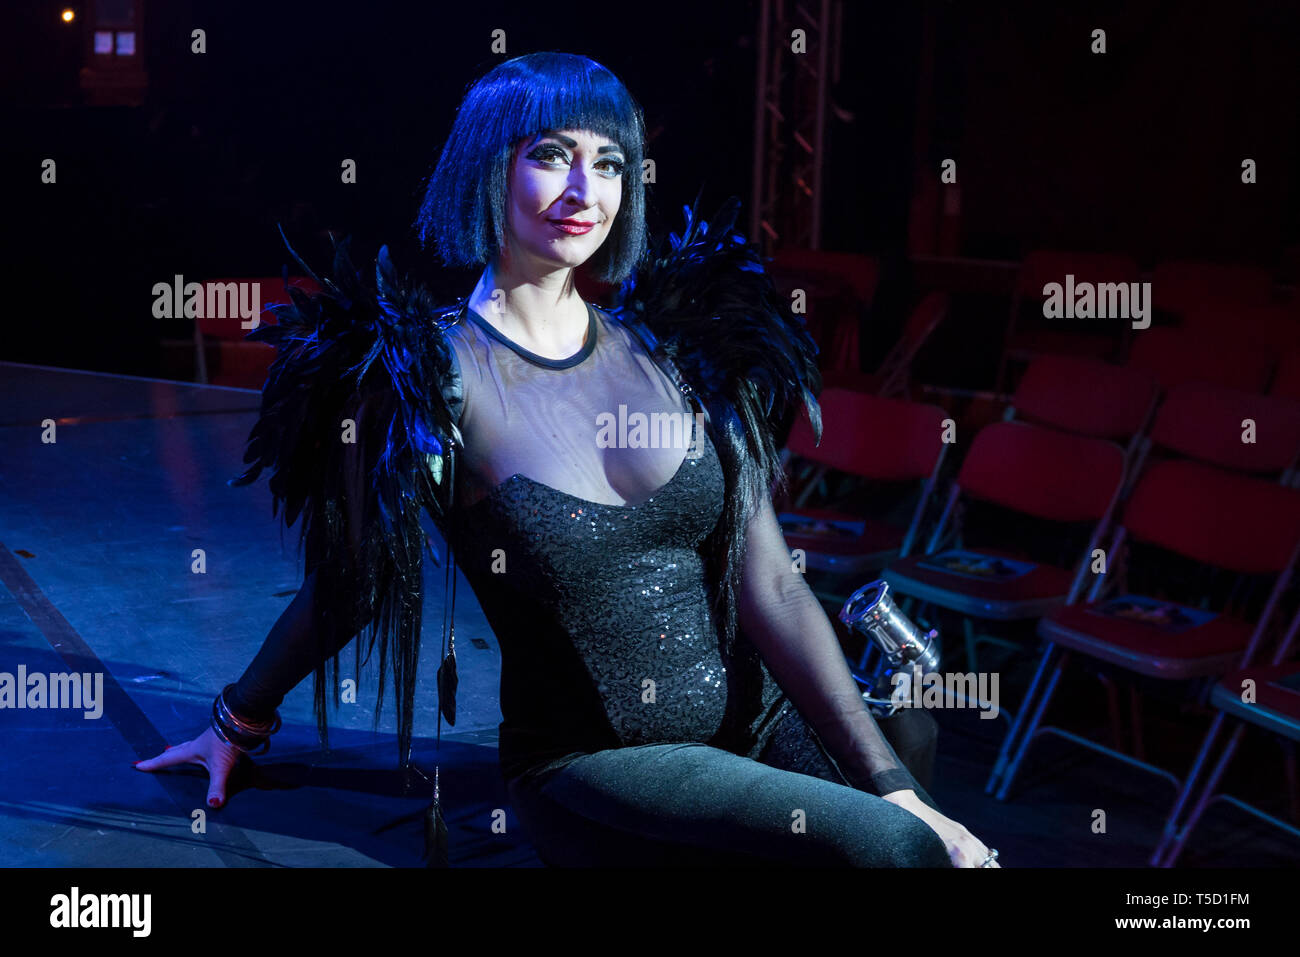 London, UK.  24 April 2019. Bernie Dieter (Mistress of Chaos) poses at the preview of Bernie Dieter's 'Little Death Club' an eclectic performance show taking place at the Underbelly Festival on the Southbank until 23 June 2019. Credit: Stephen Chung / Alamy Live News Stock Photo